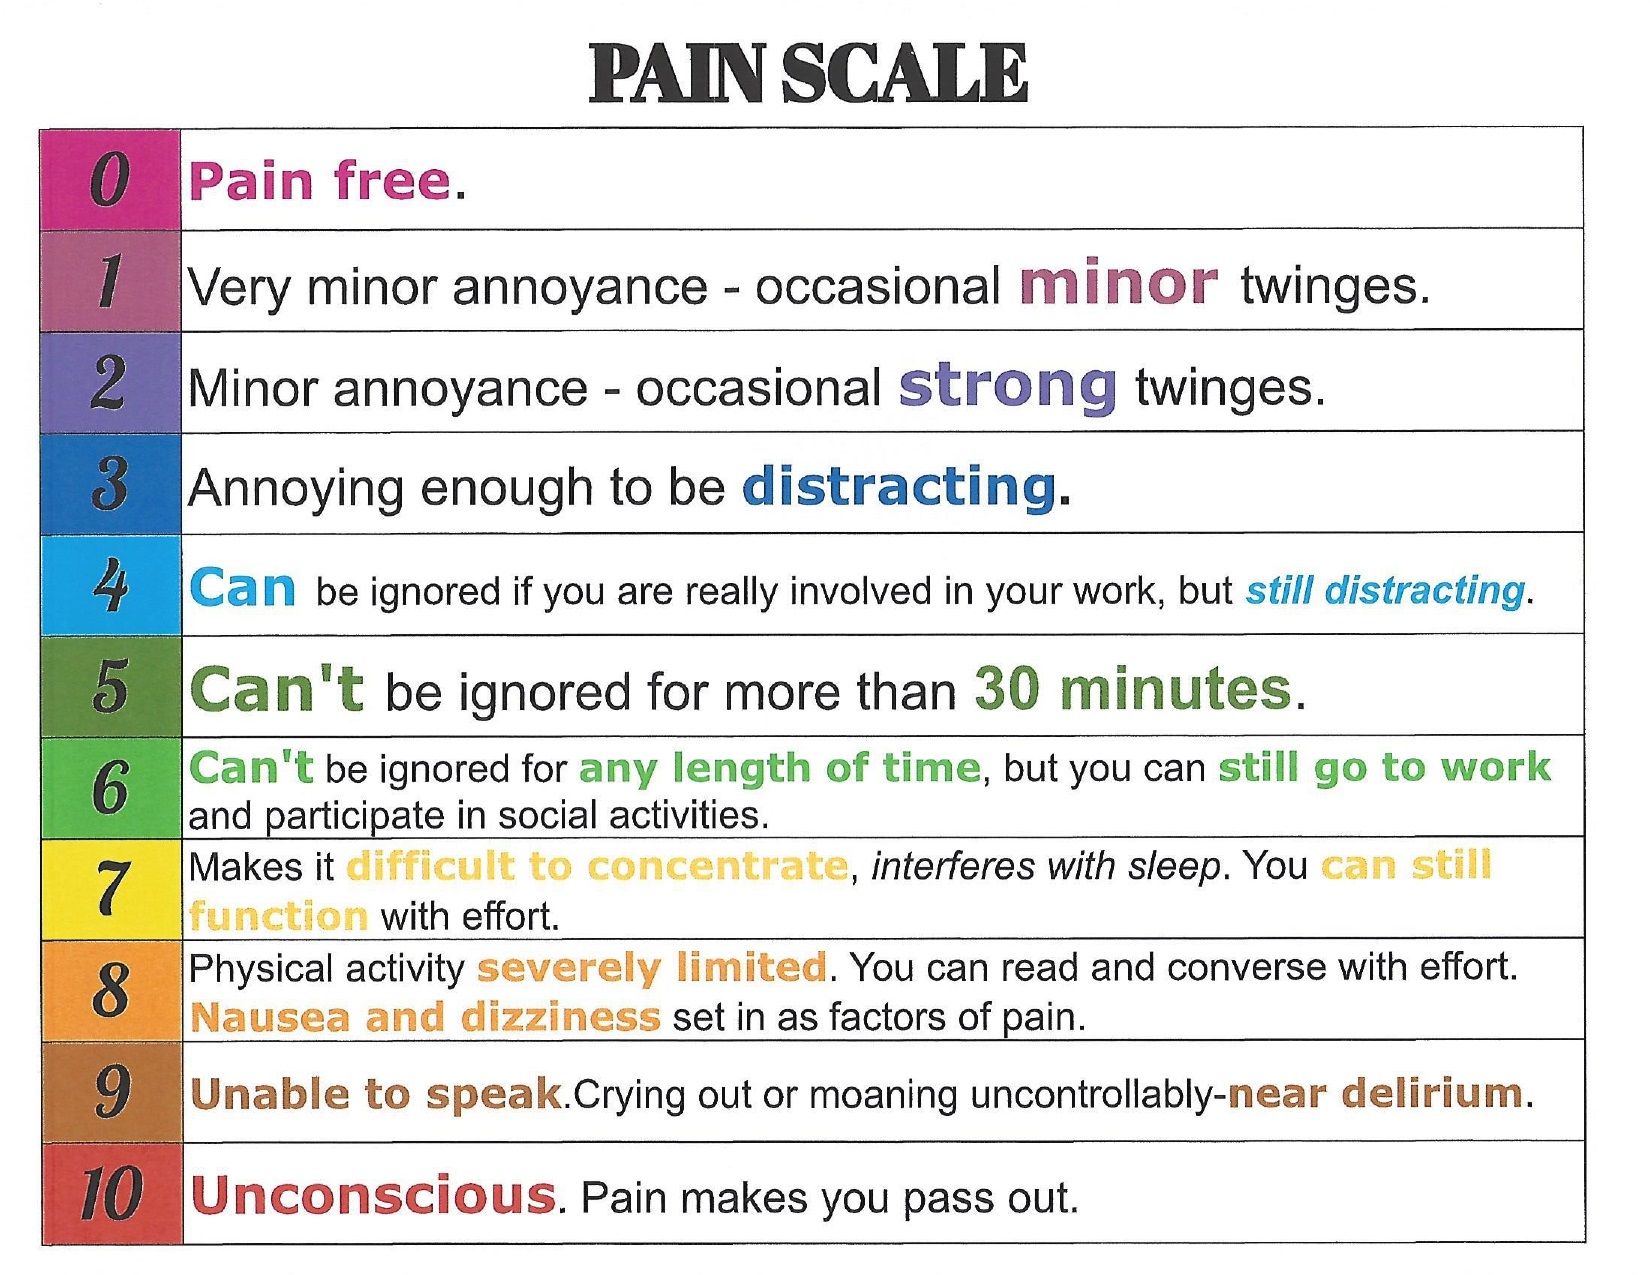 pain-scale-2021